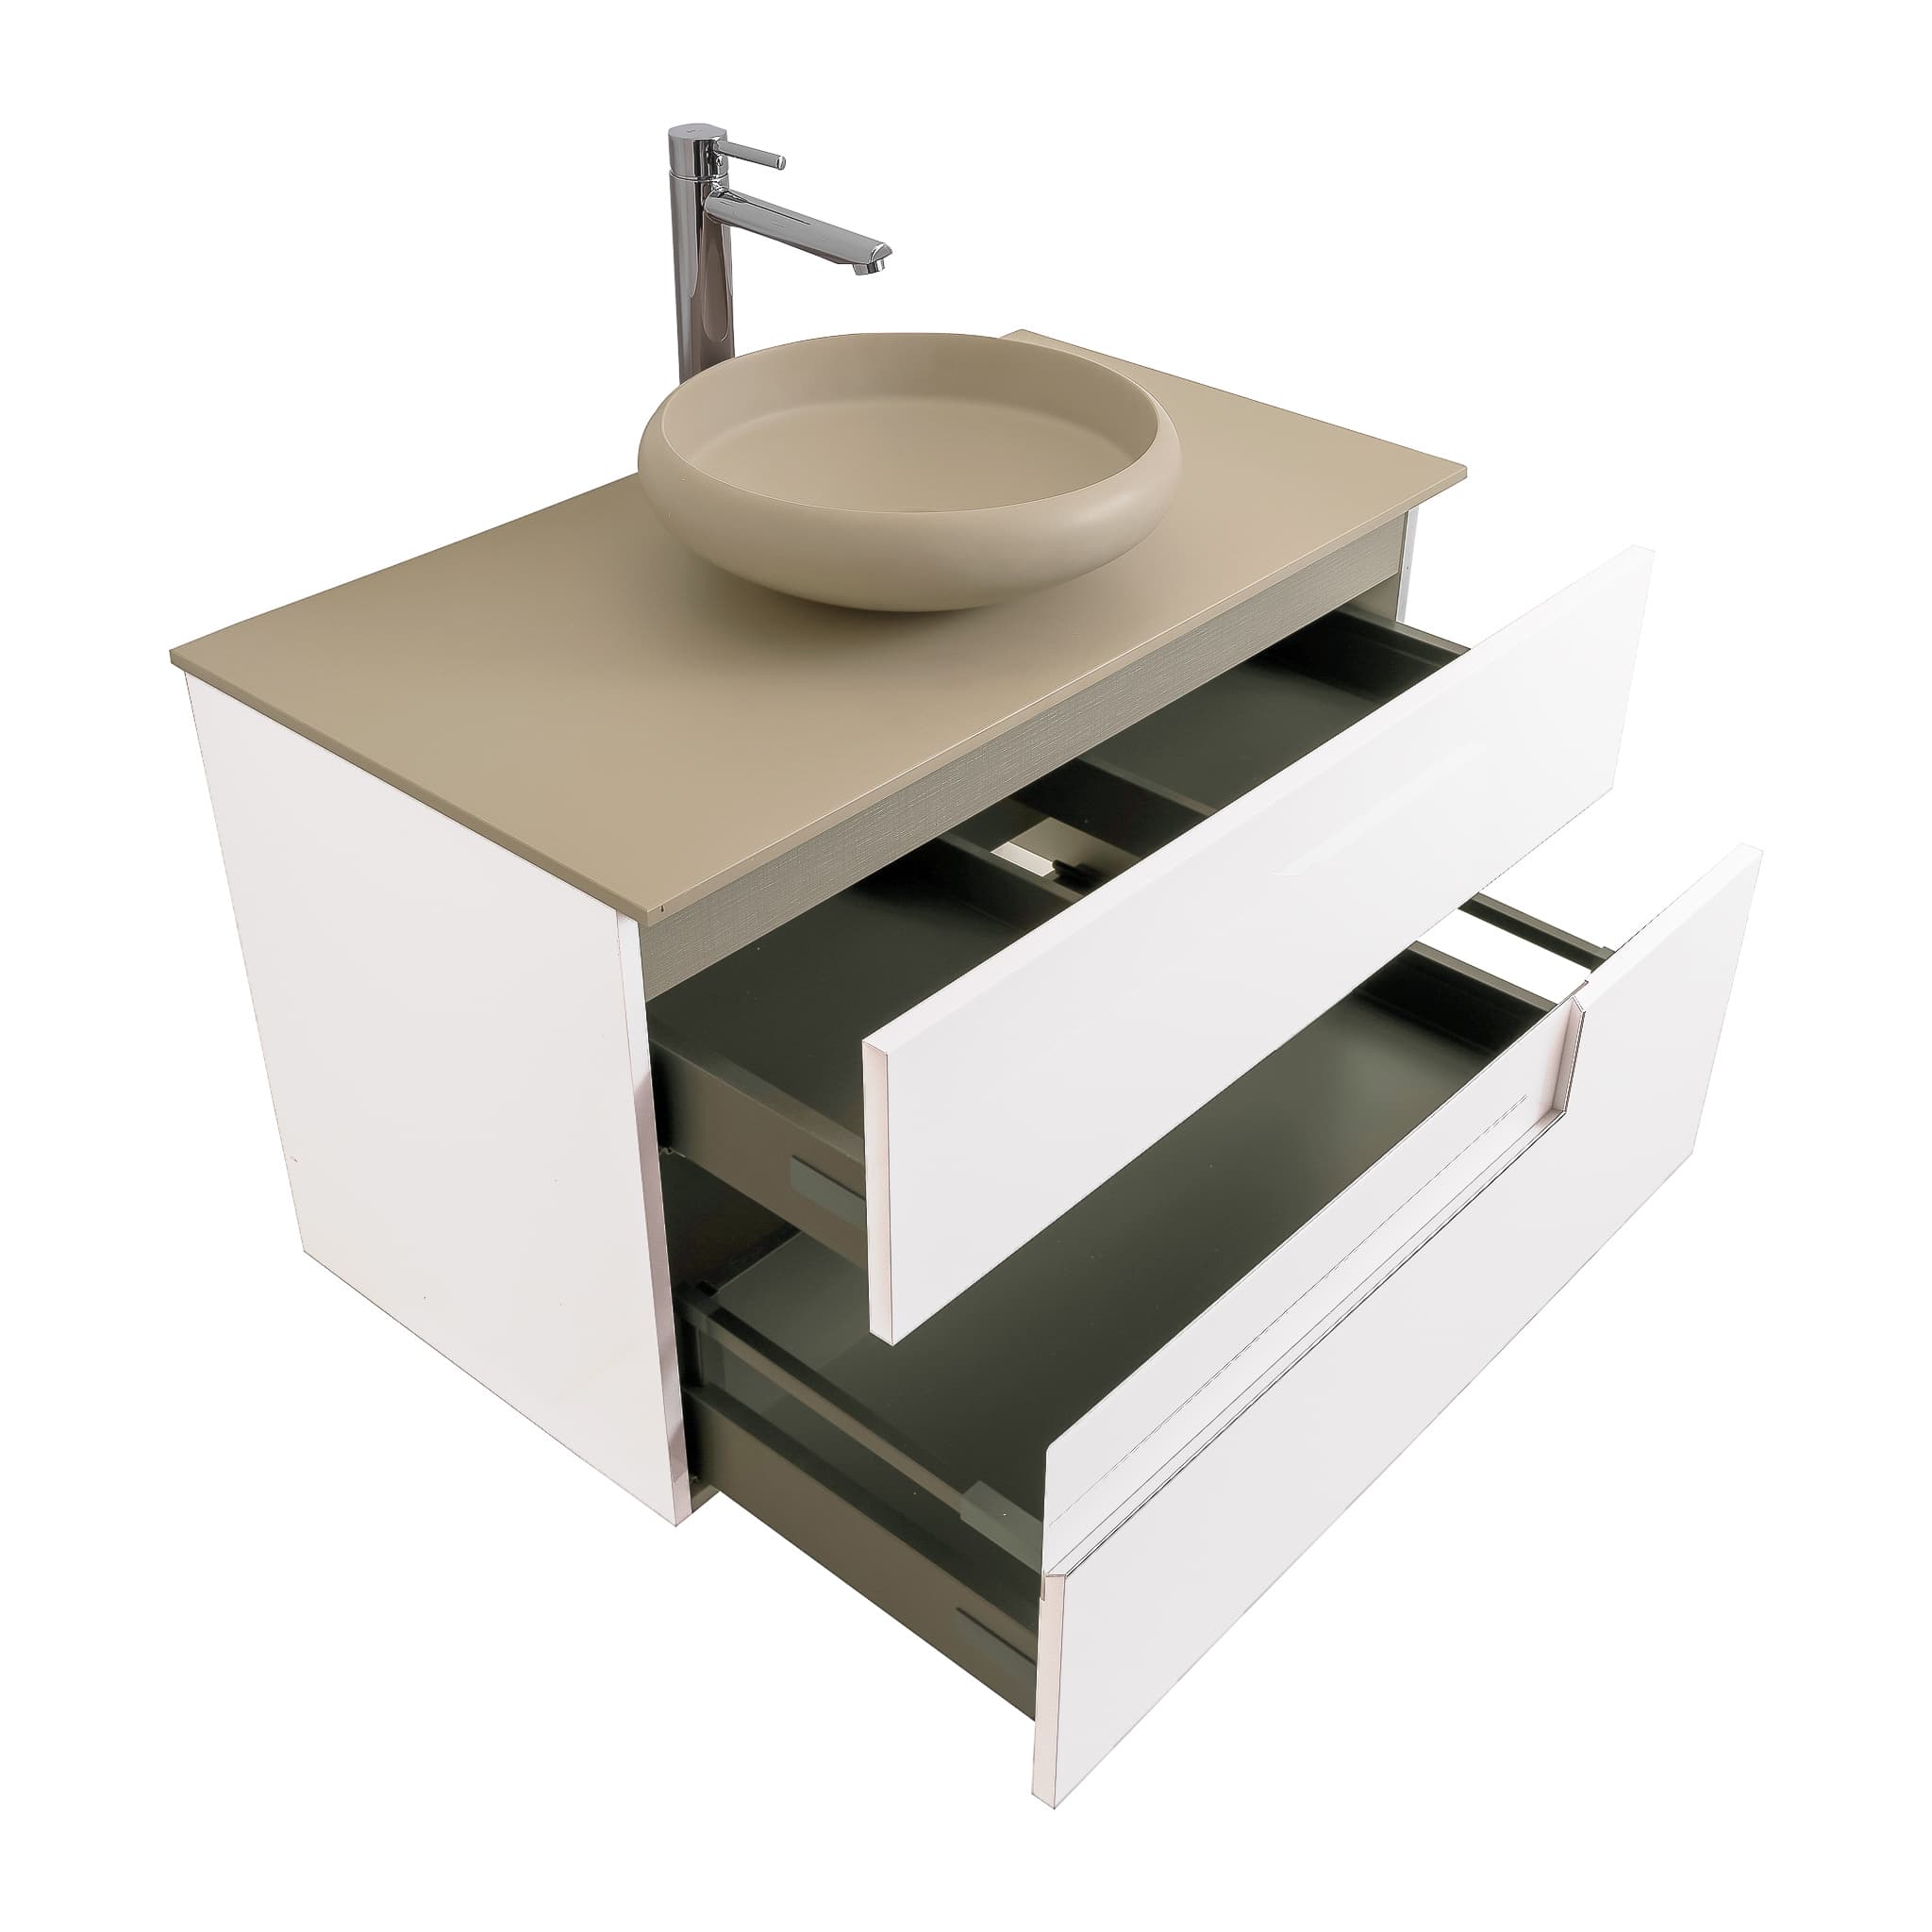 Vision 39.5 White High Gloss Cabinet, Solid Surface Flat Taupe Counter And Round Solid Surface Taupe Basin 1153, Wall Mounted Modern Vanity Set